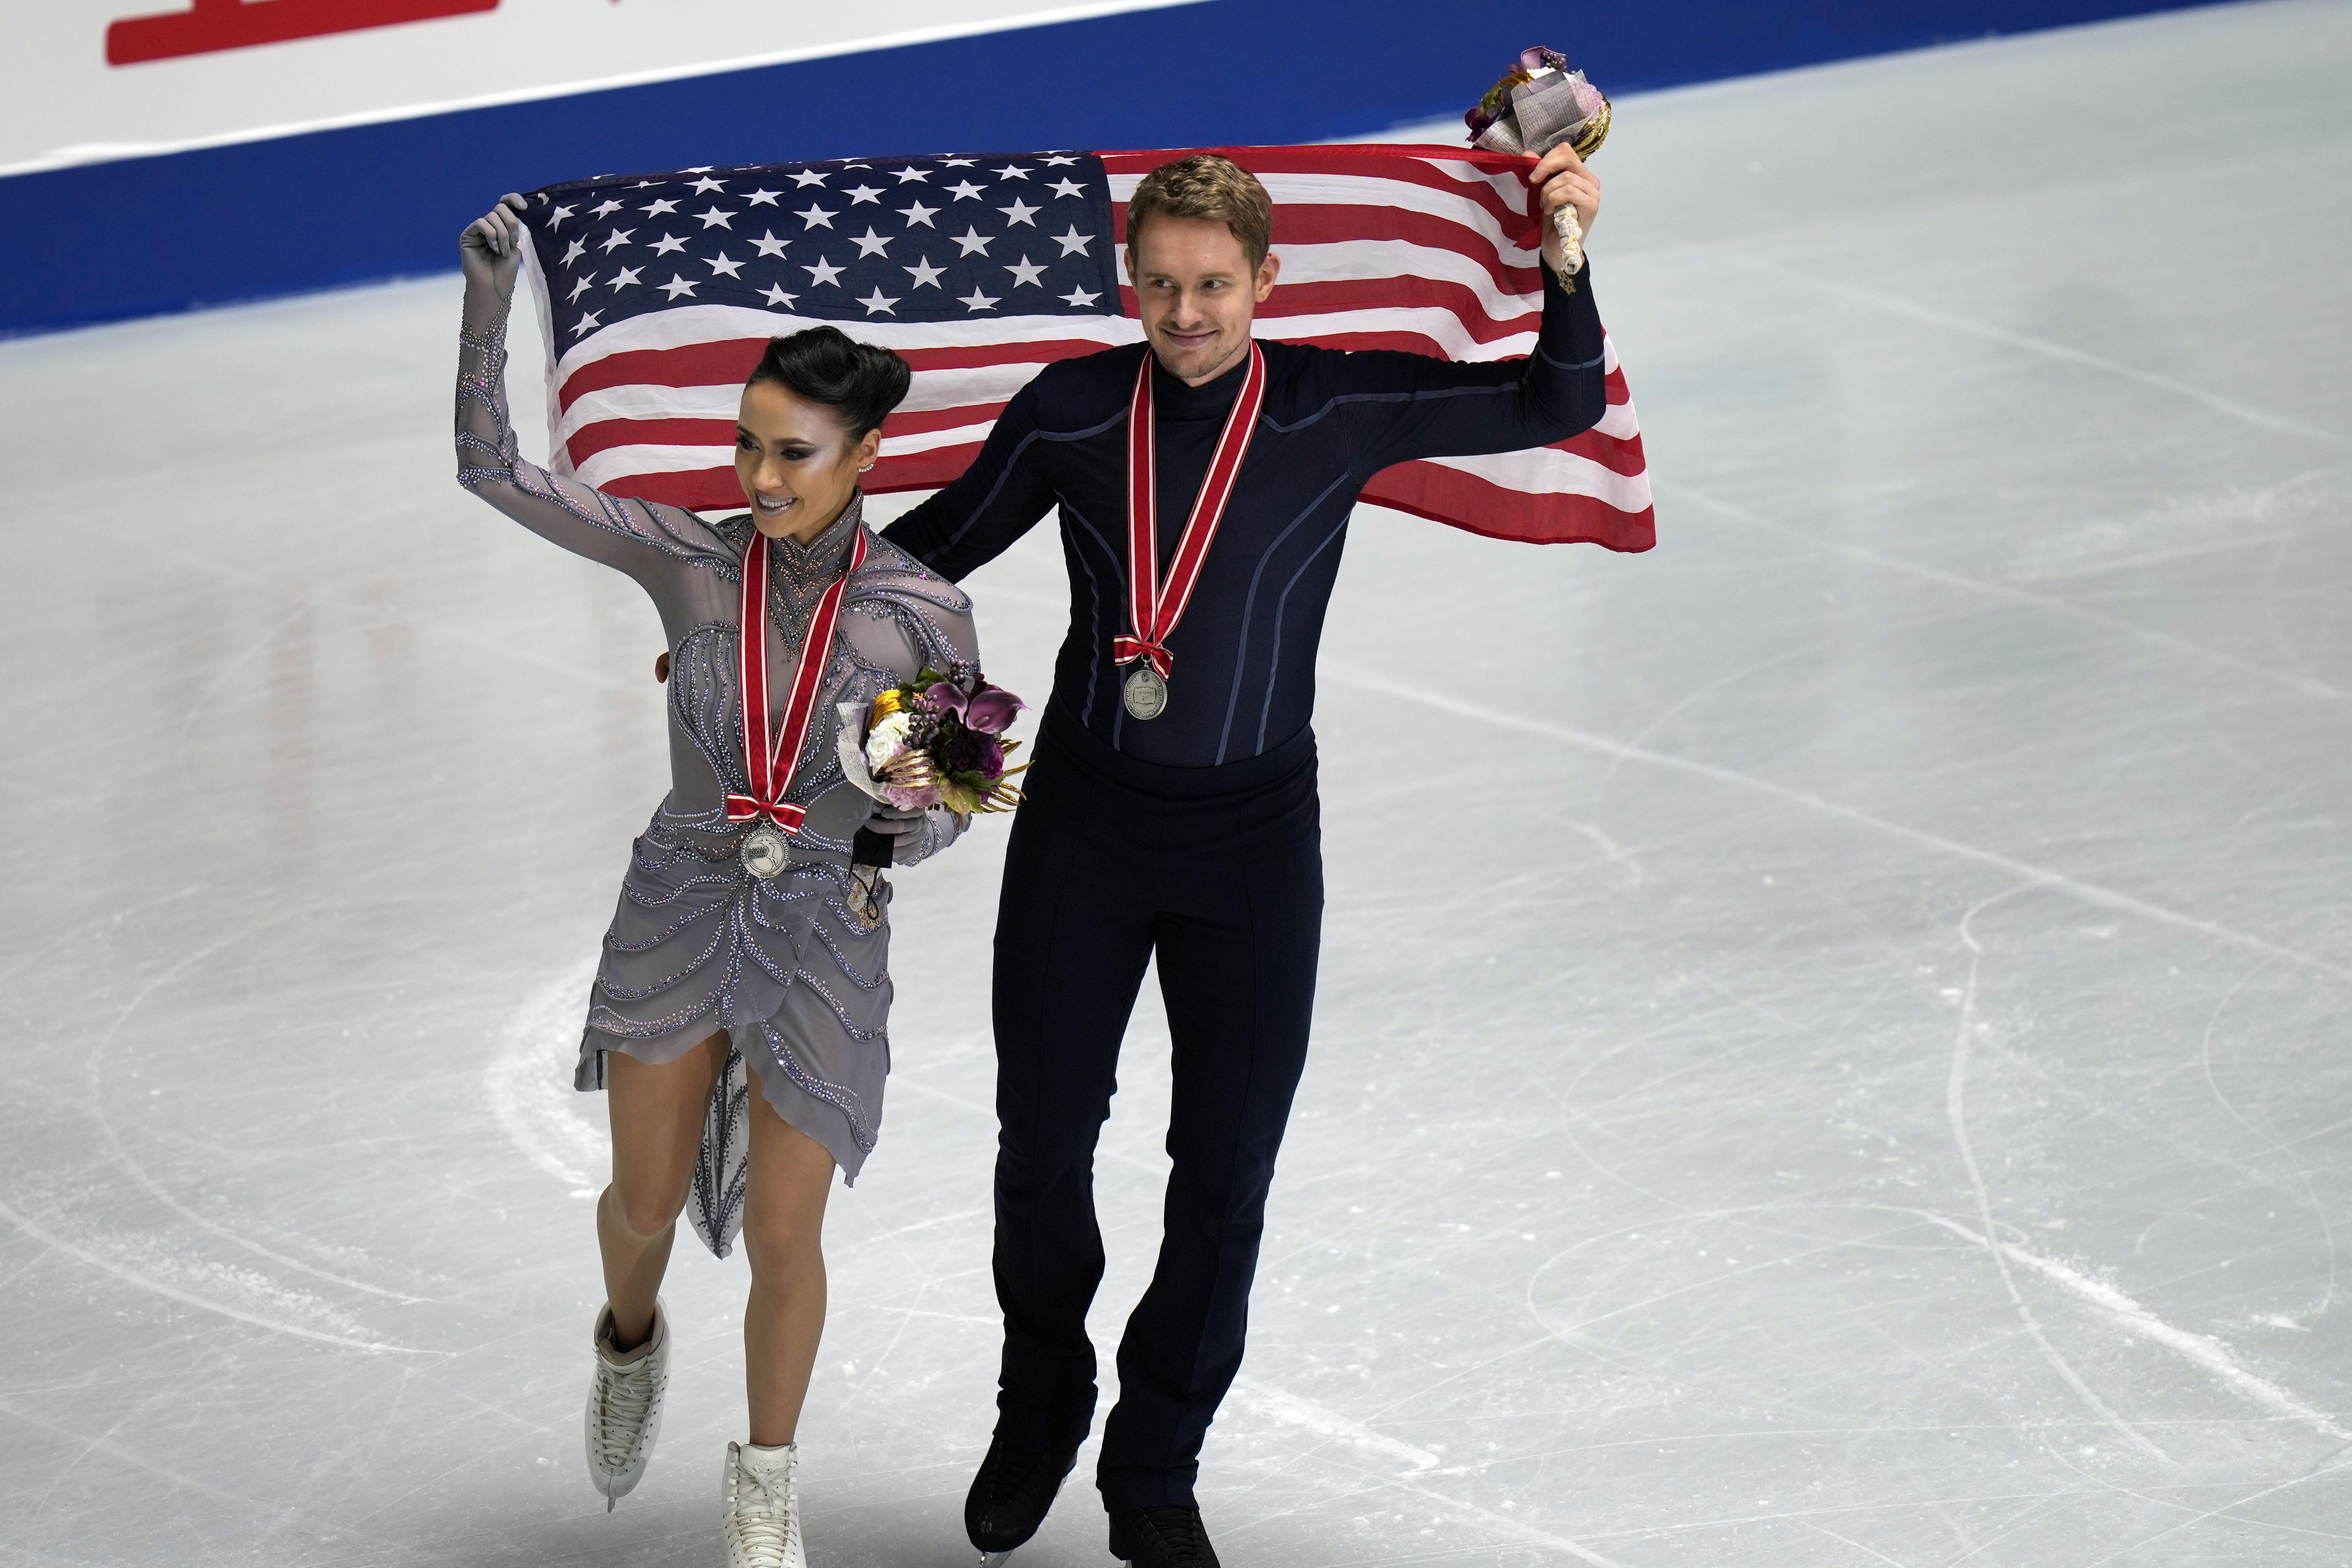 How to watch figure skating in Winter Olympics 2022 Live stream options, dates